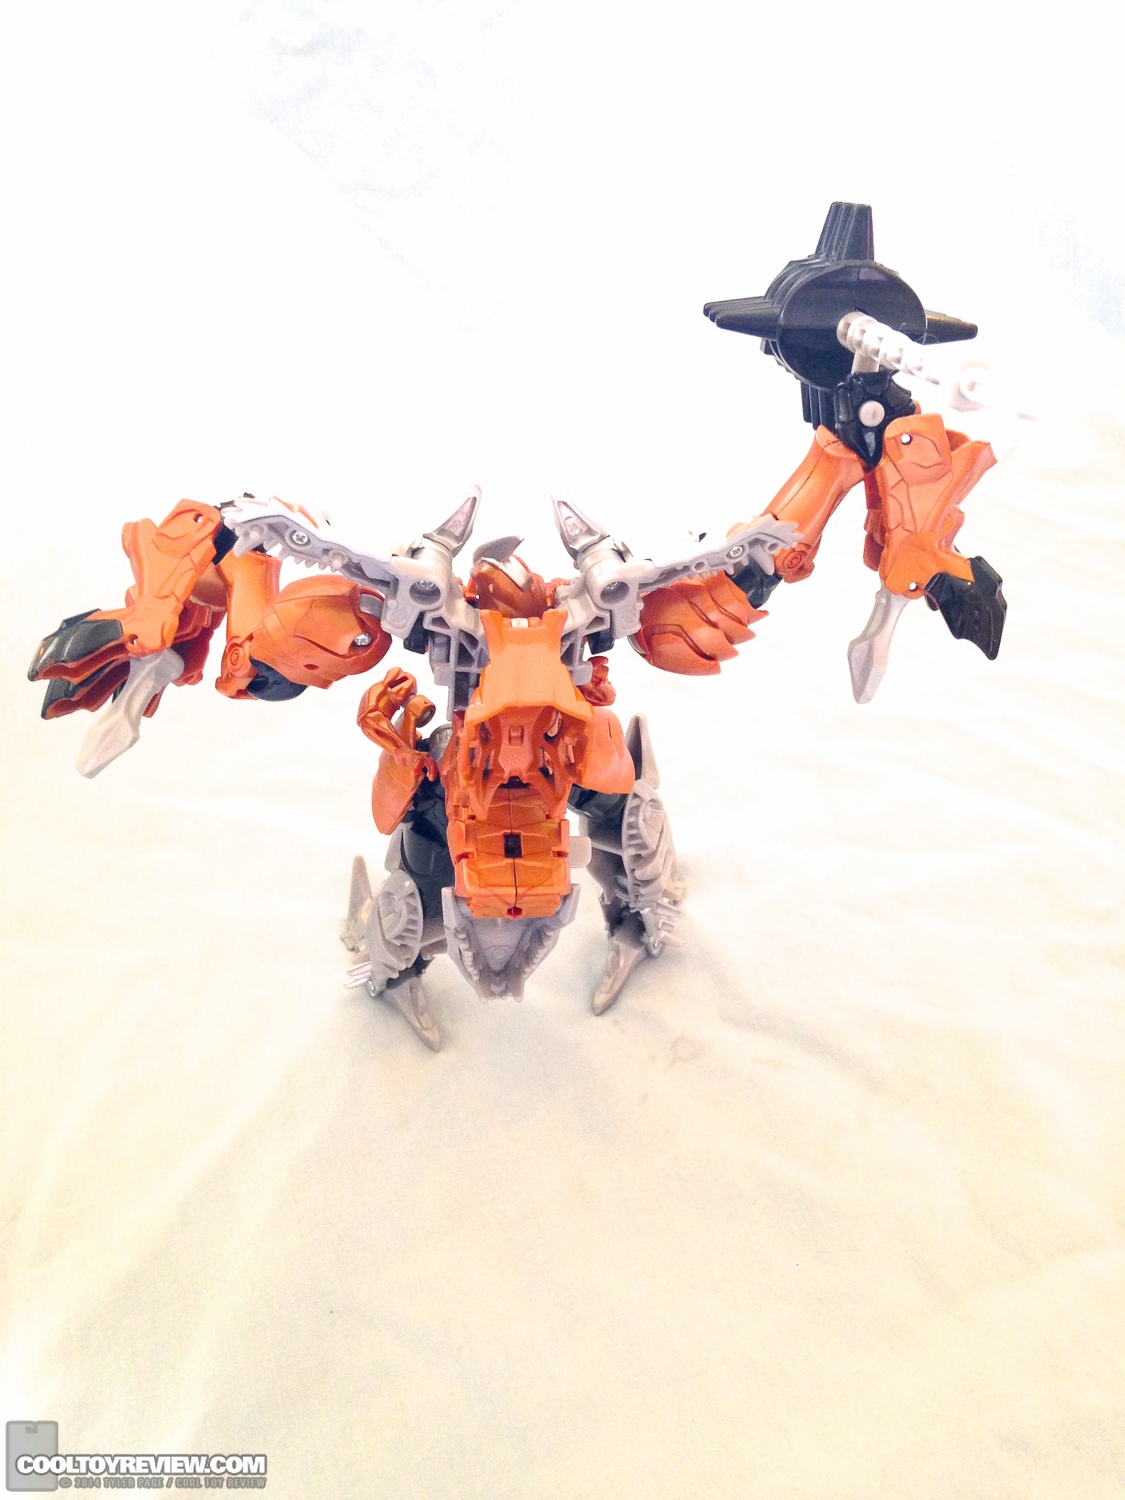 Transformers-Age-of-Extinction-Hasbro-Action-Figures-Review-017.jpg